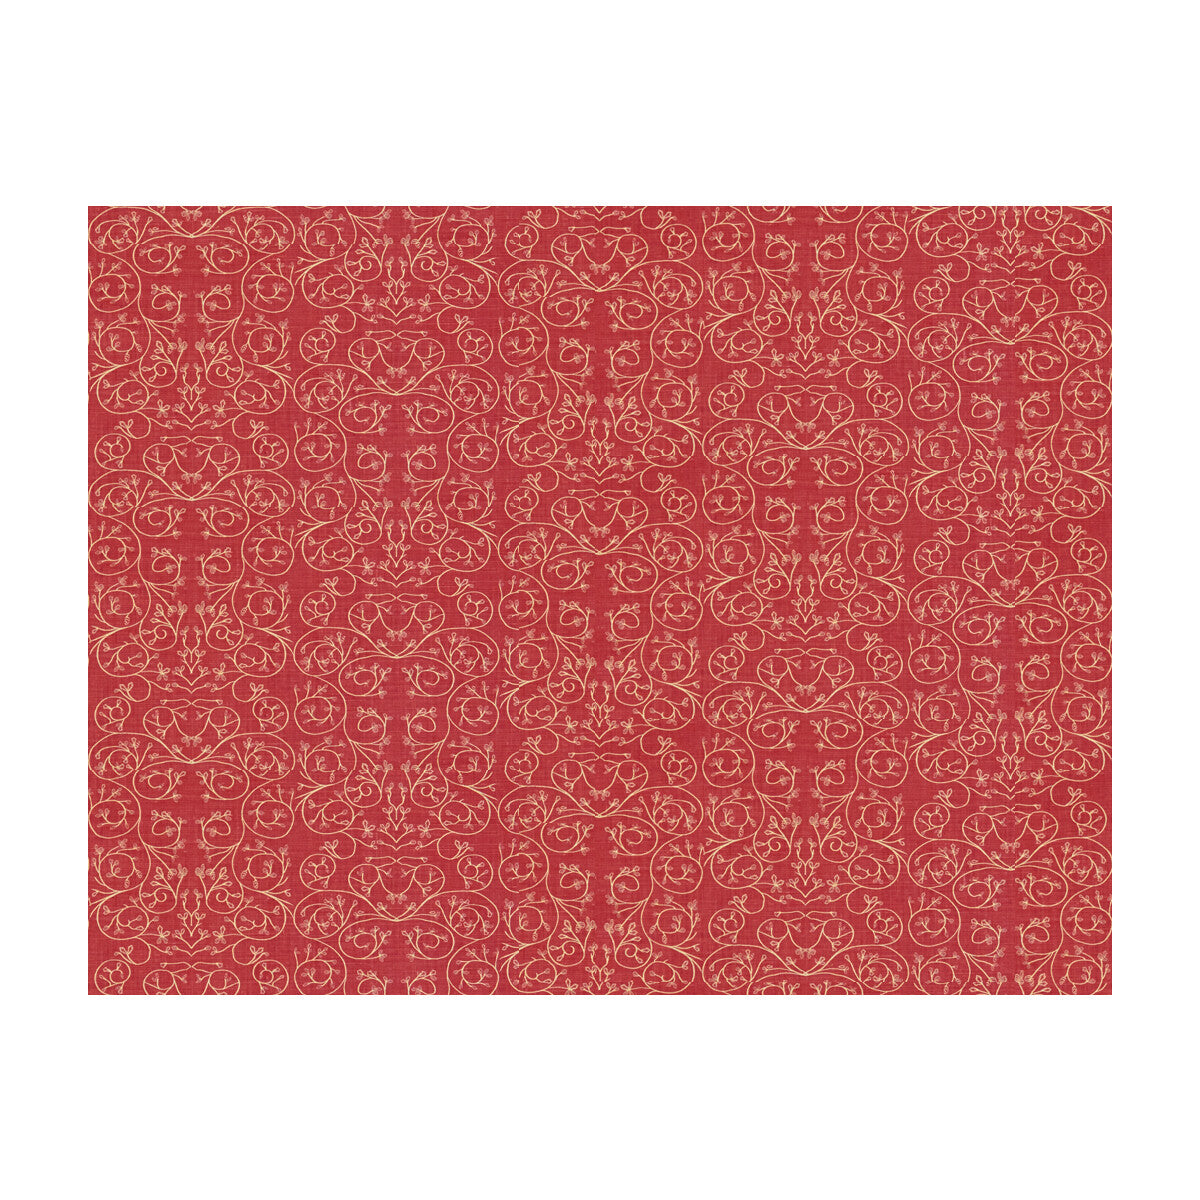 Garden Reverse fabric in cerise color - pattern GWF-3512.7.0 - by Lee Jofa Modern in the Allegra Hicks Garden collection